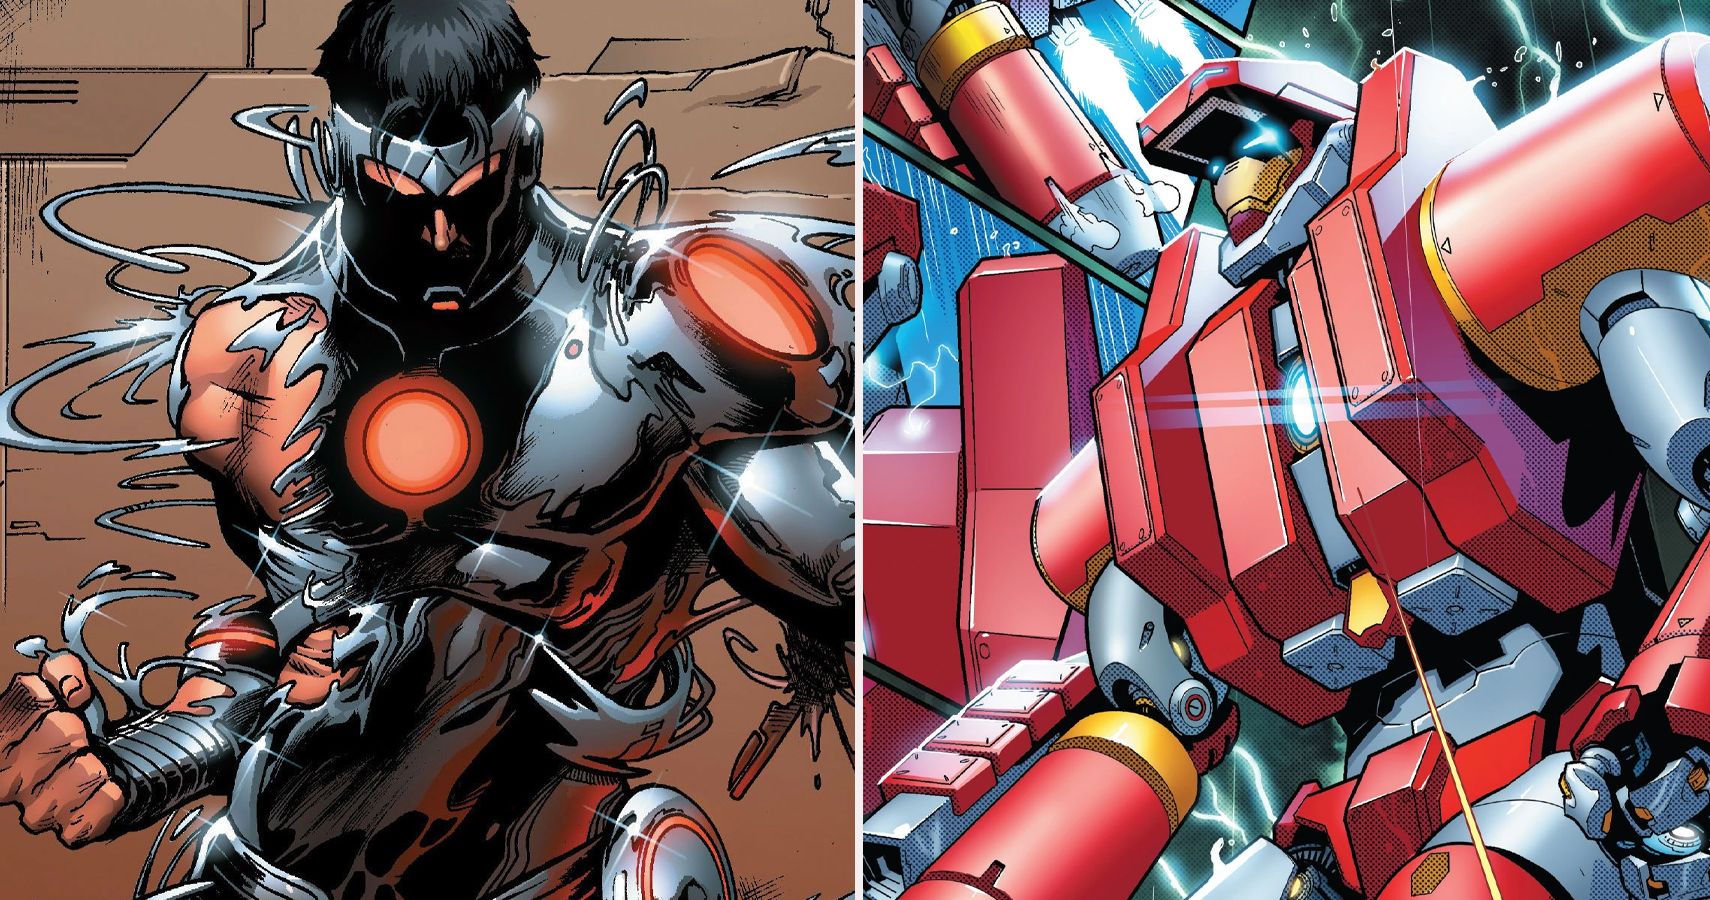 10 Iron Man Armors We Hope To See More Of In The Comics